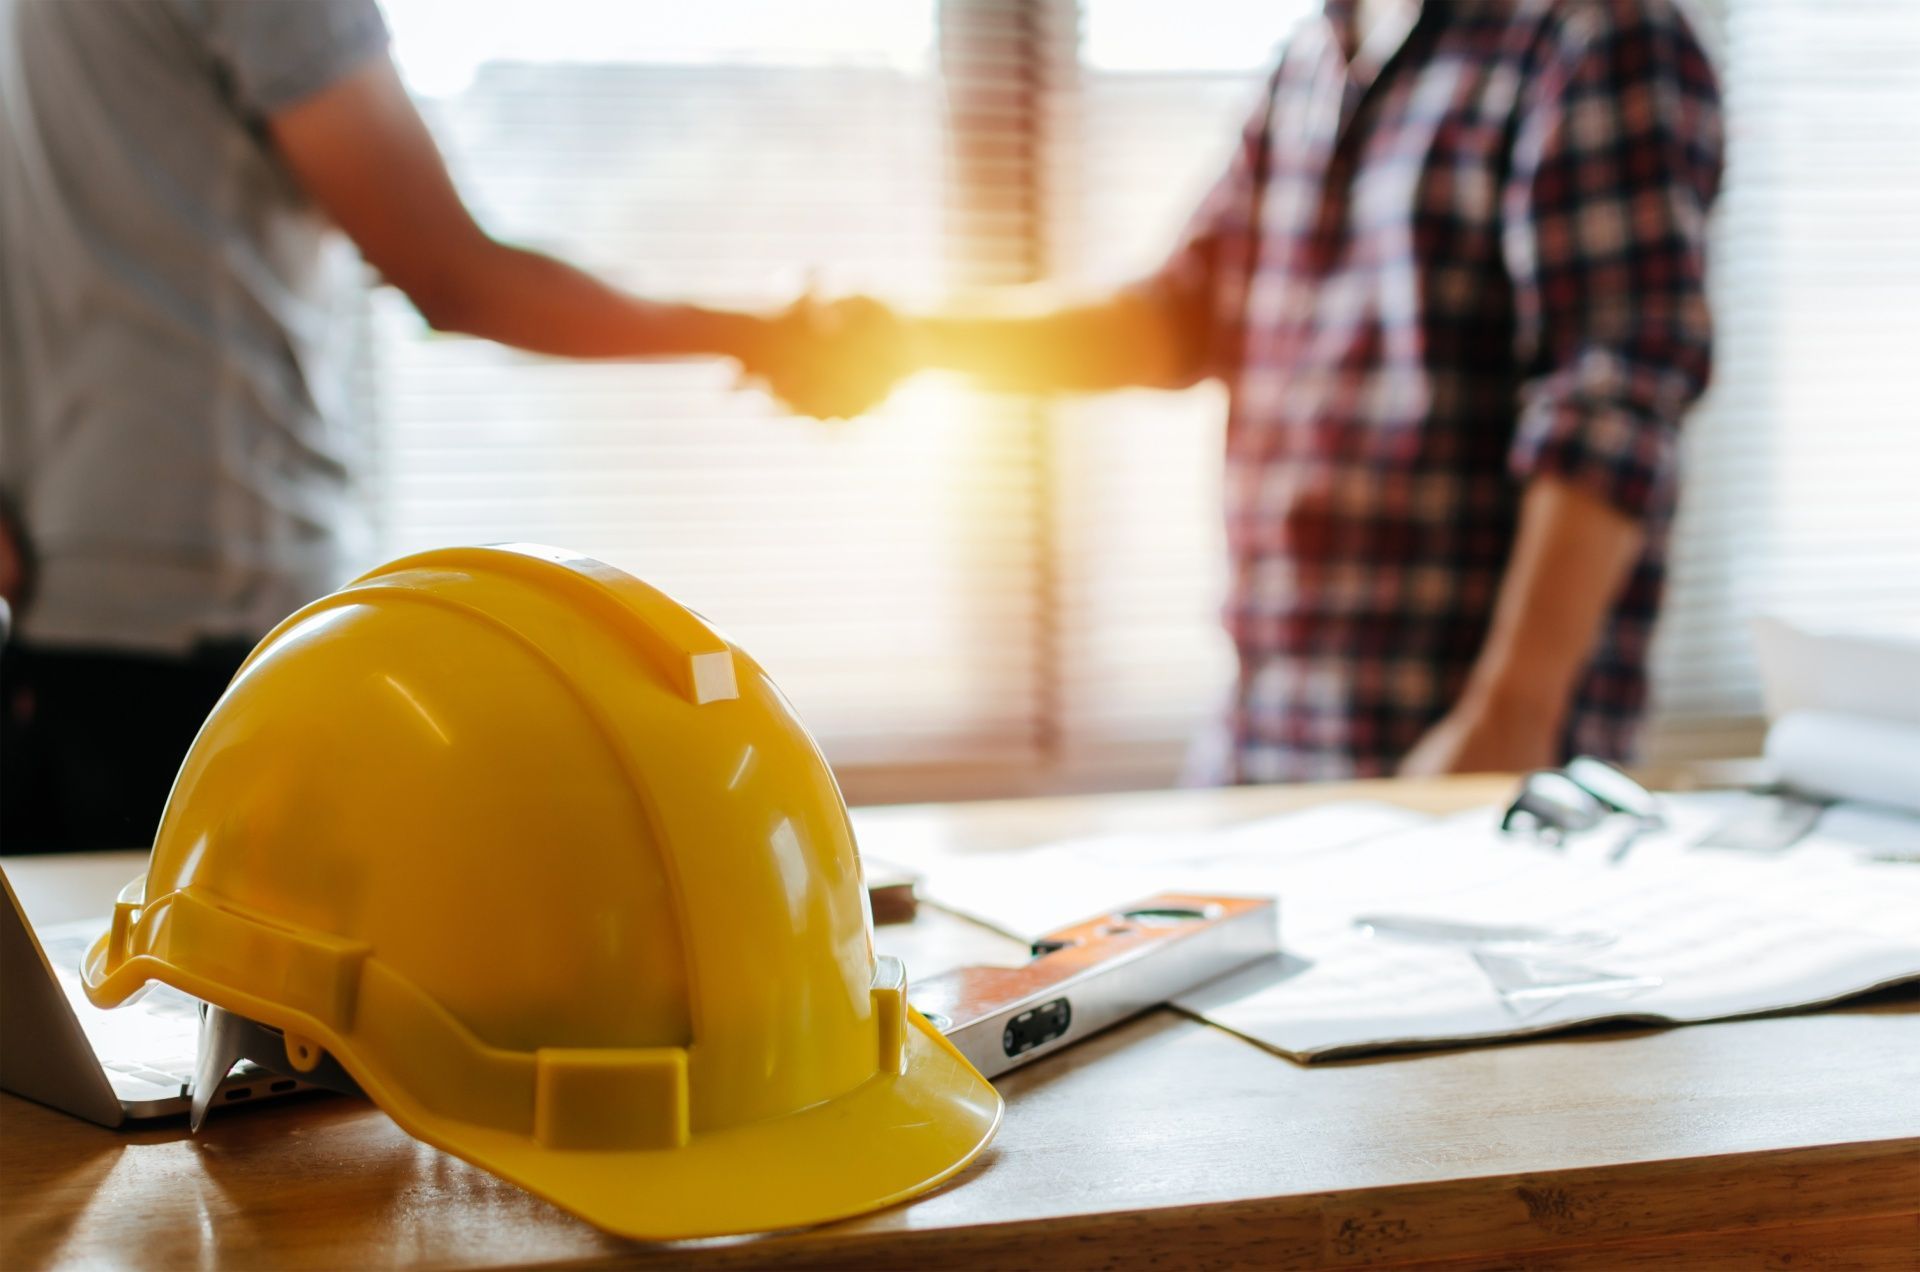 Two men are shaking hands over a table with a hard hat on it.